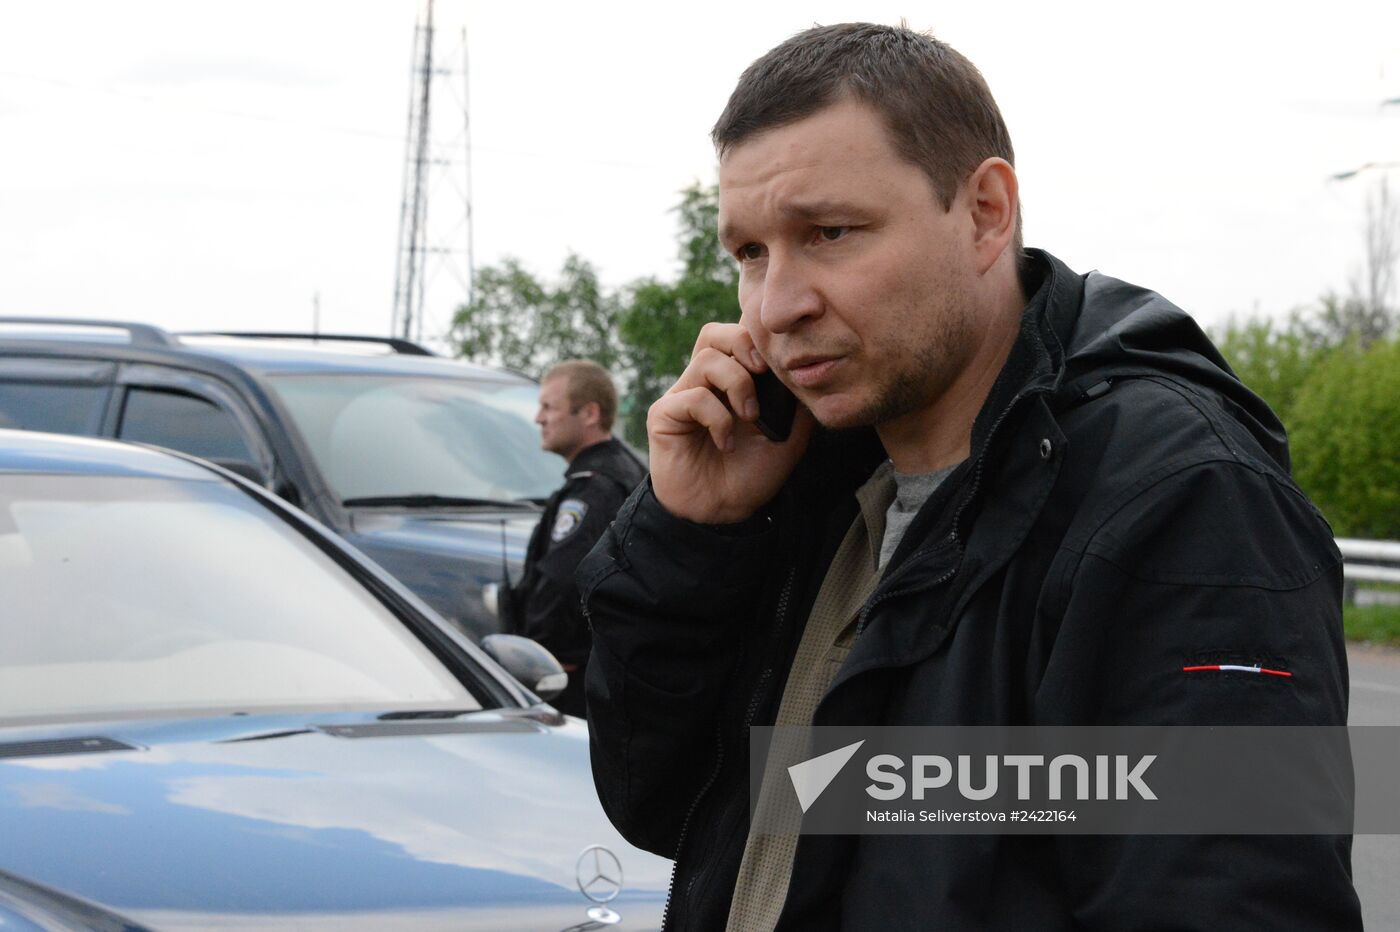 Released OSCE military inspectors arrive in Donetsk